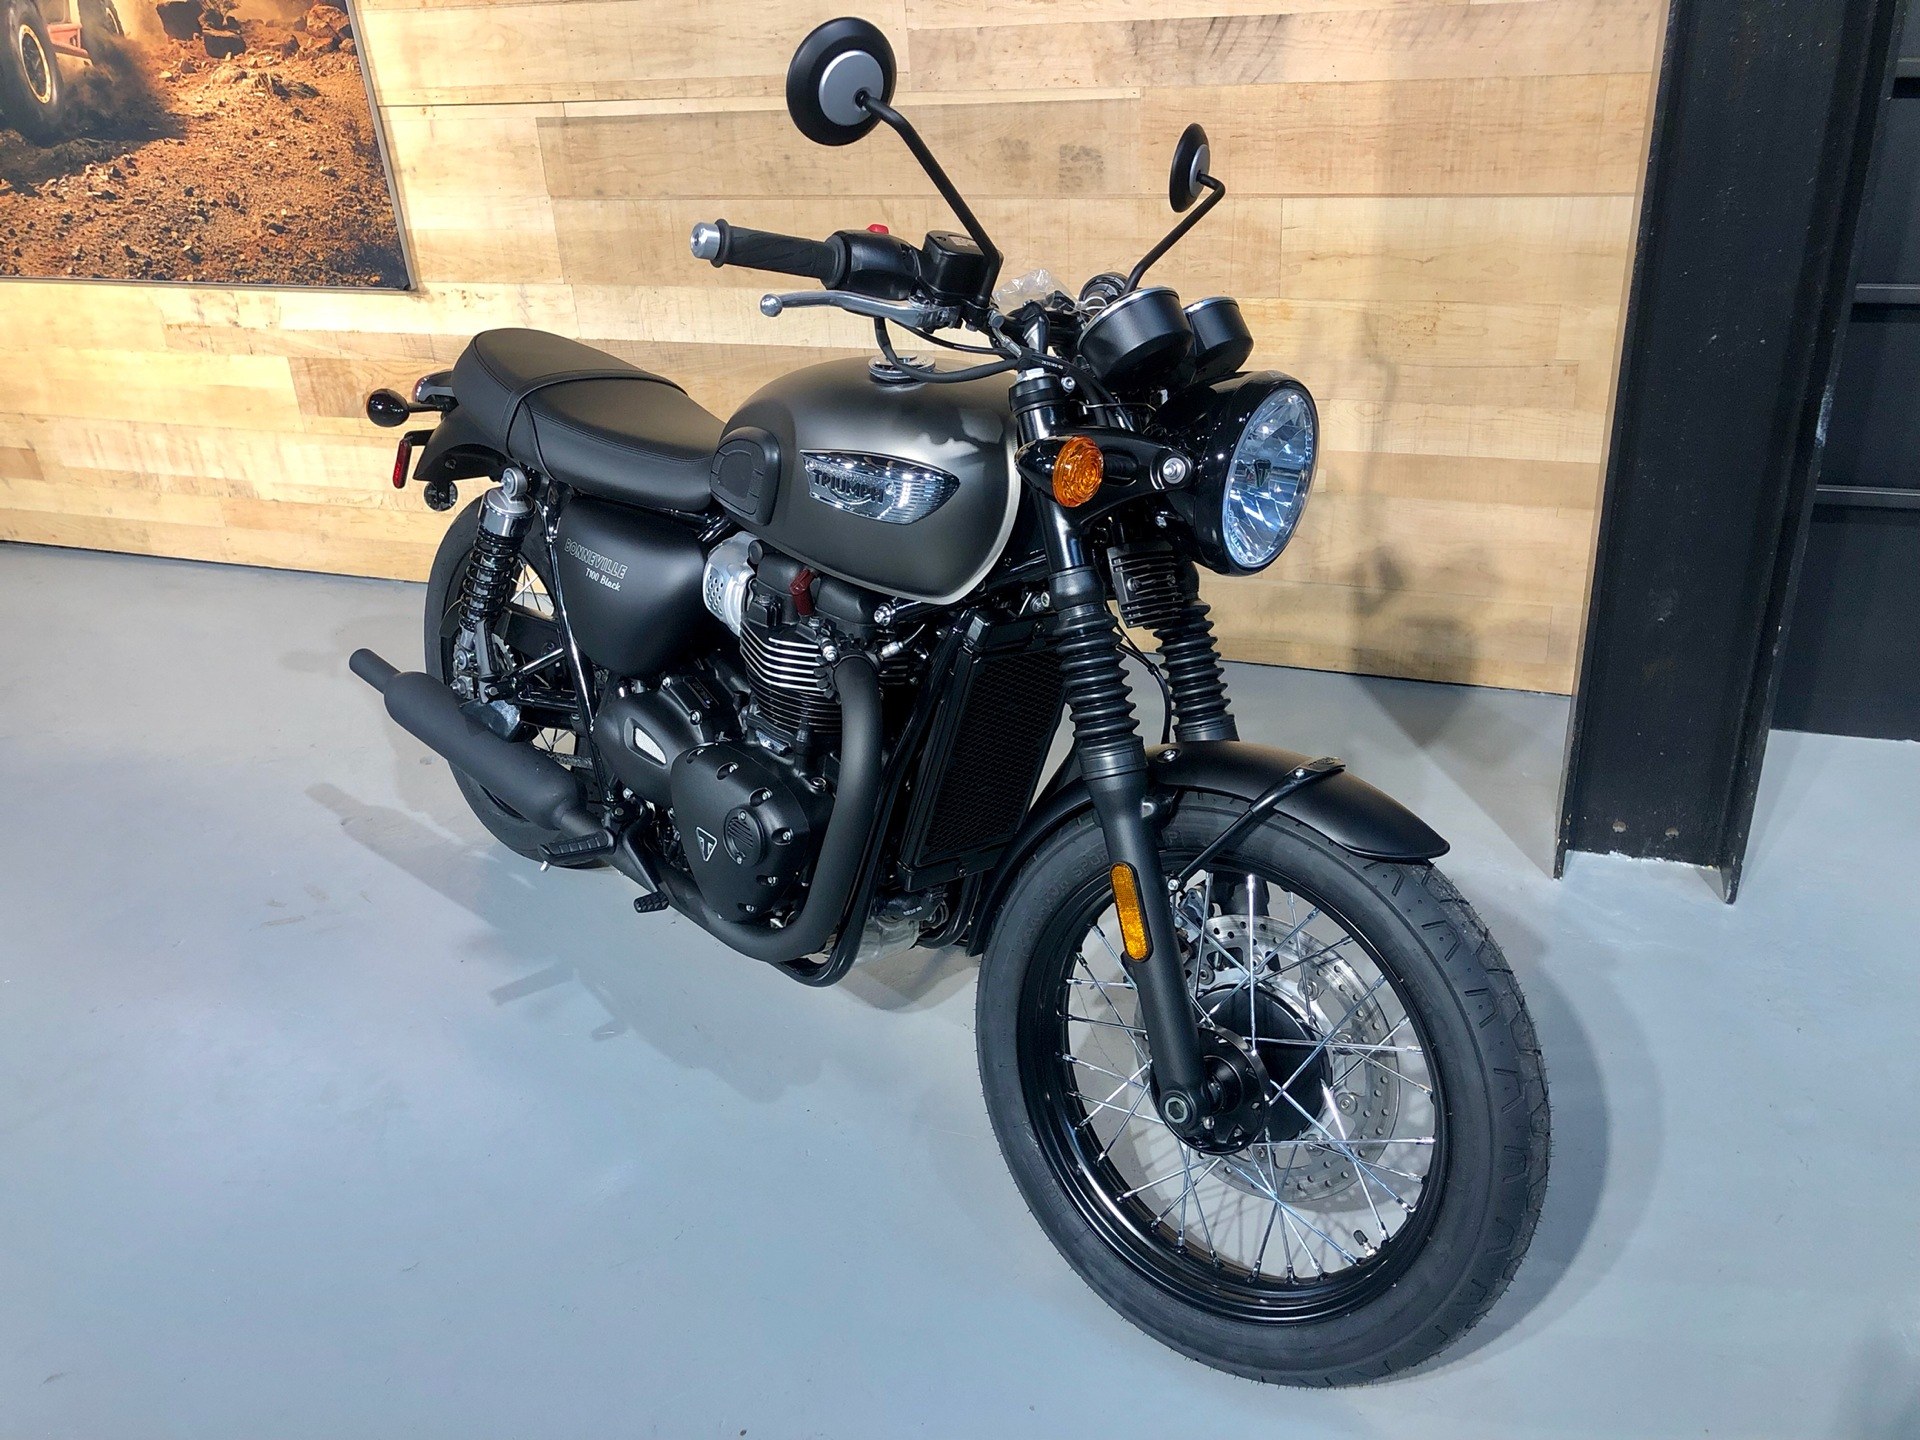 New 2020 Triumph Bonneville T100 Black Motorcycles In Enfield Ct Stock Number N A